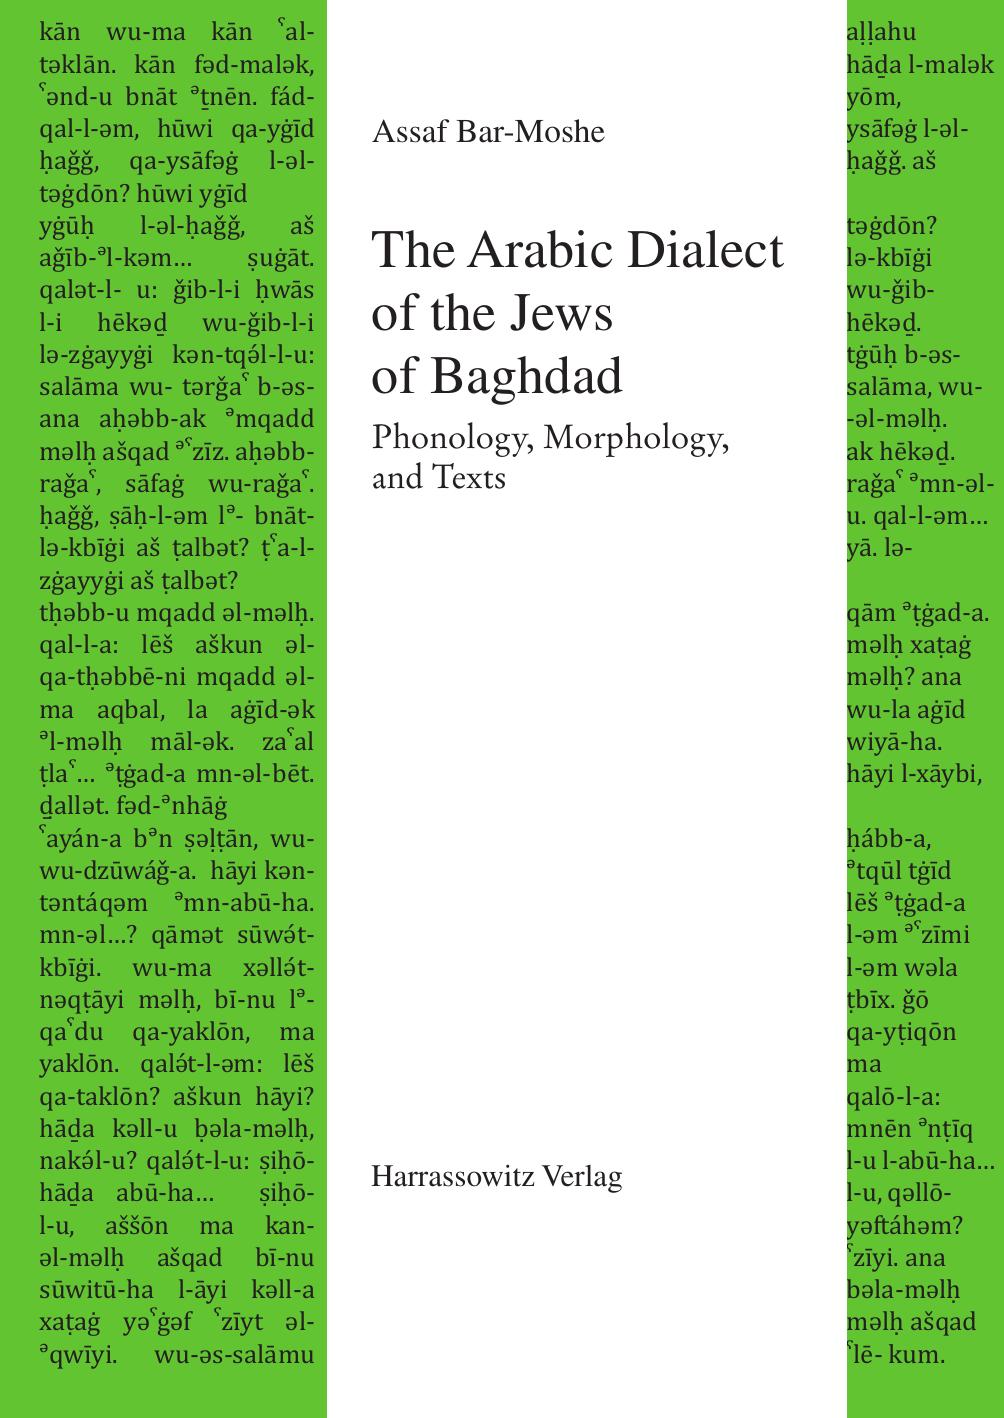 The Arabic Dialect of the Jews of Baghdad